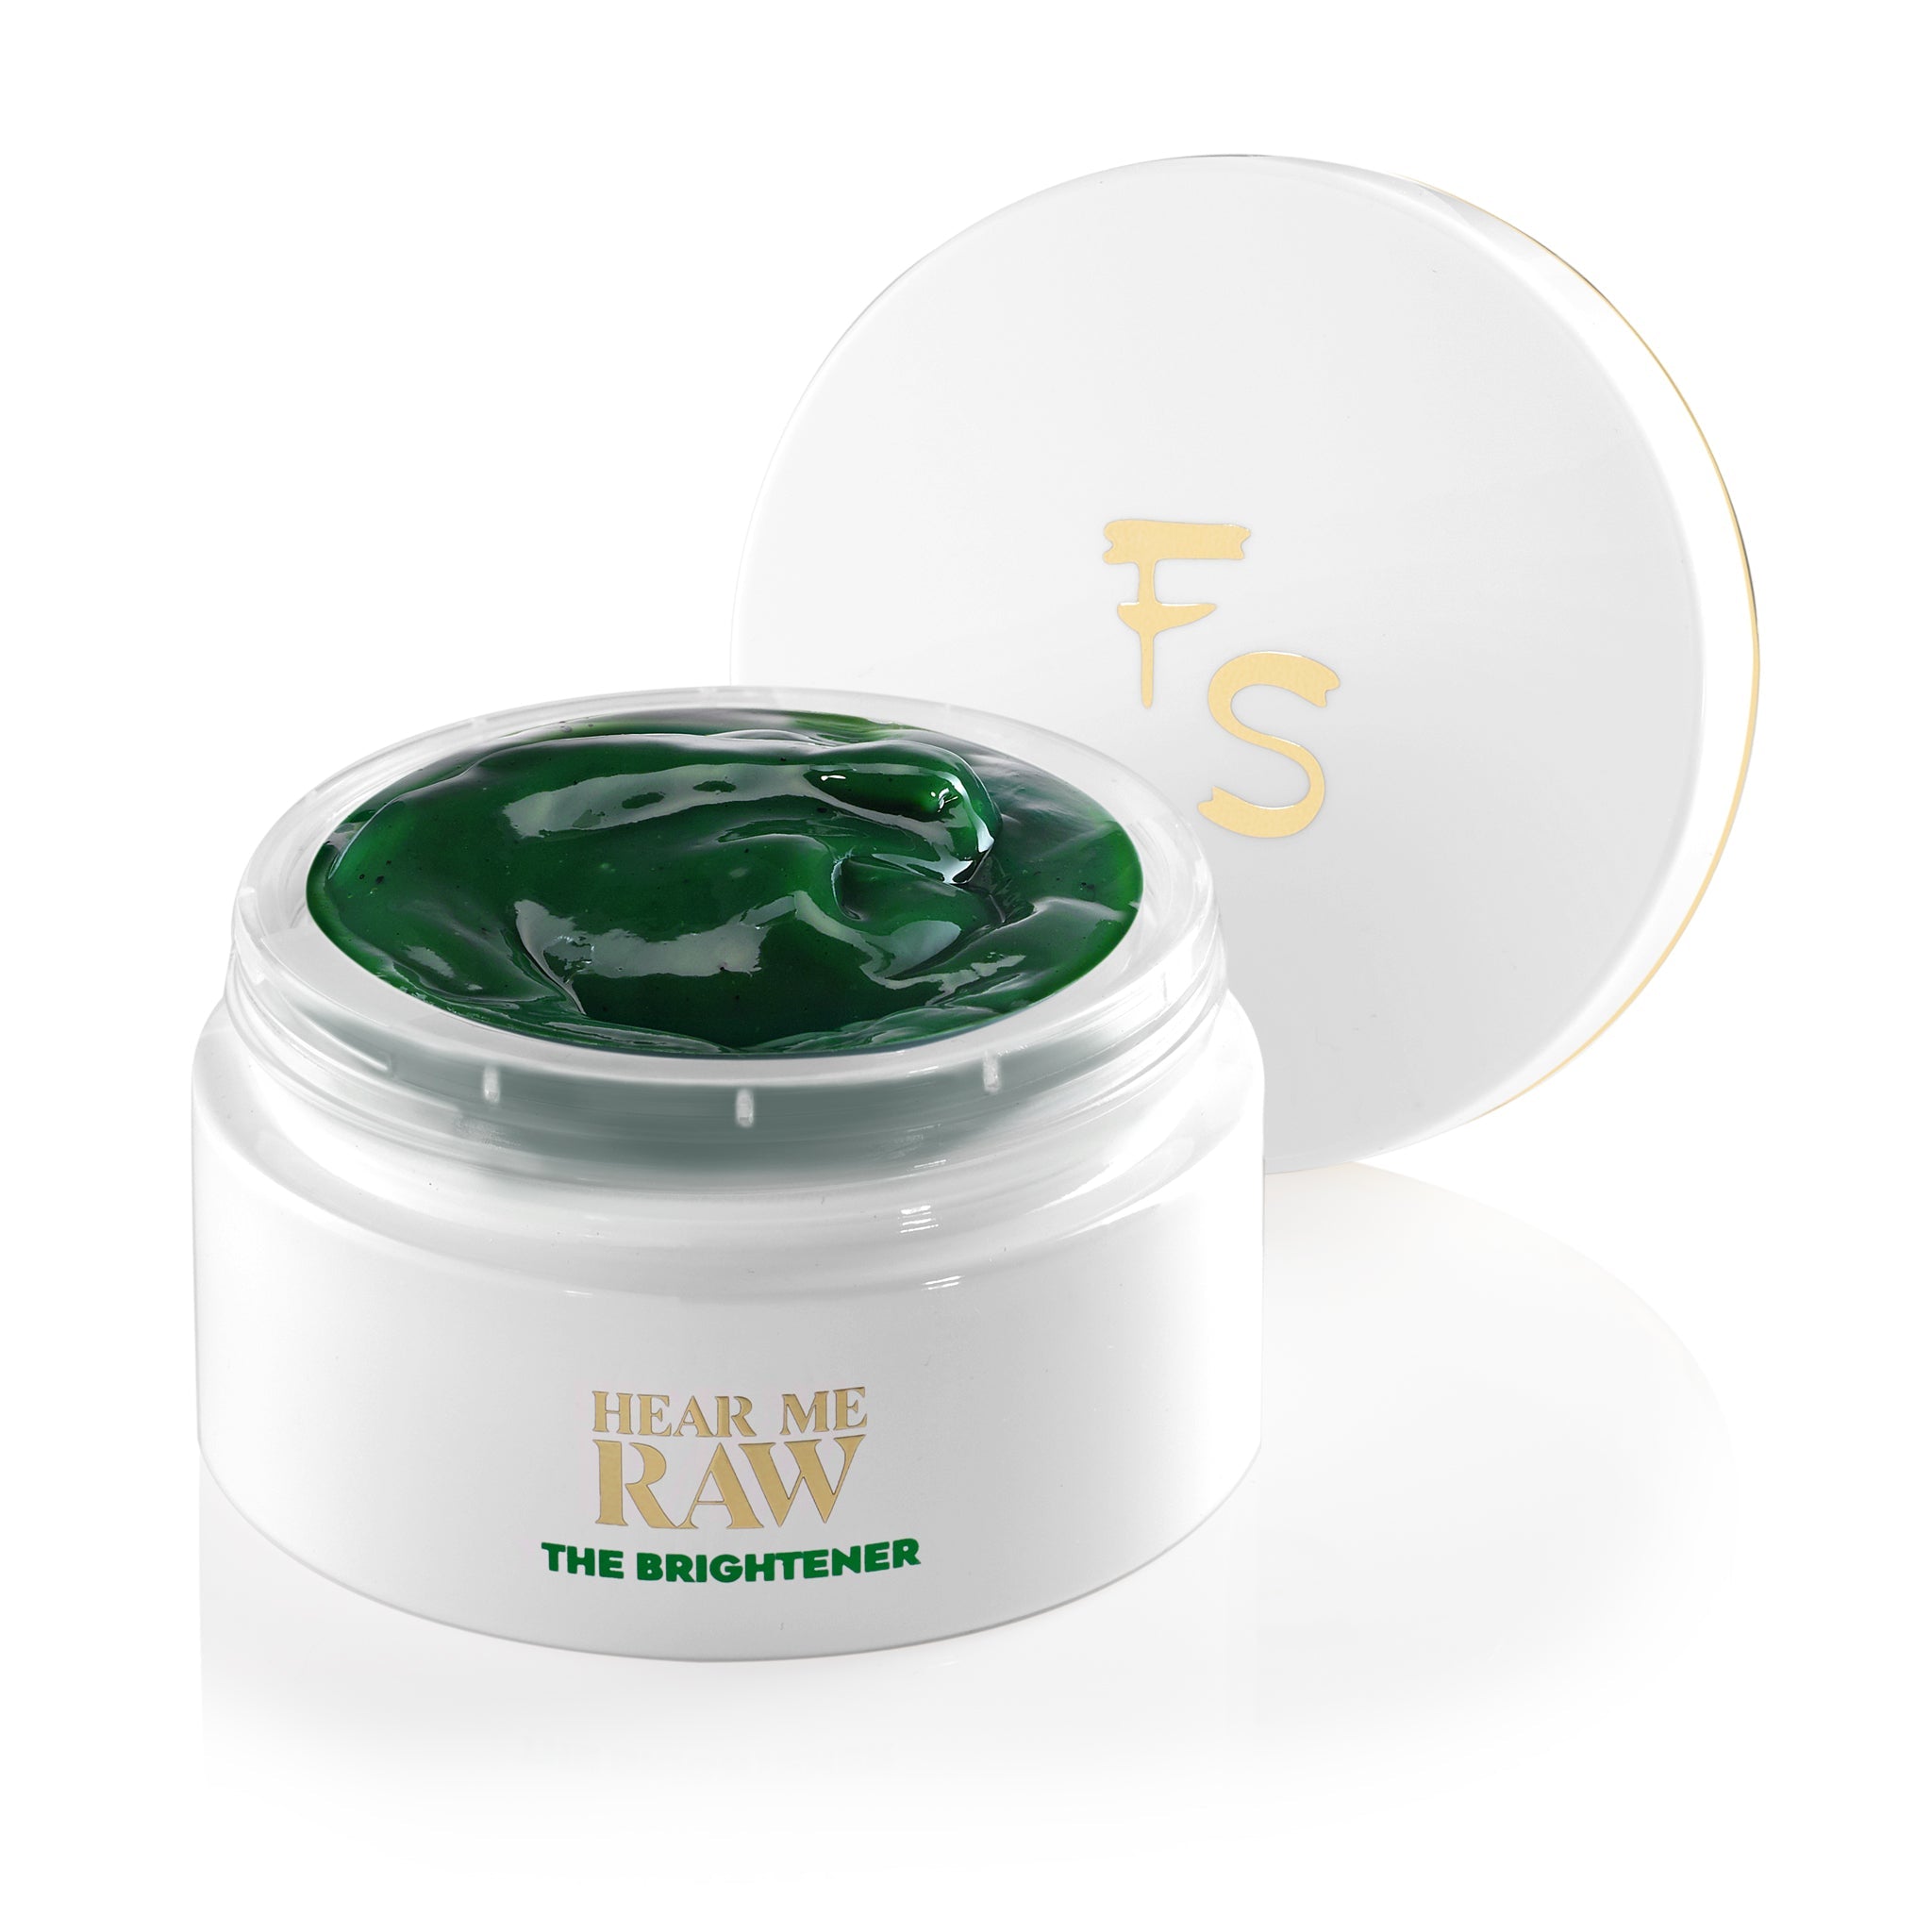 HEAR ME RAW x Fred Segal The Brightener radiance mask